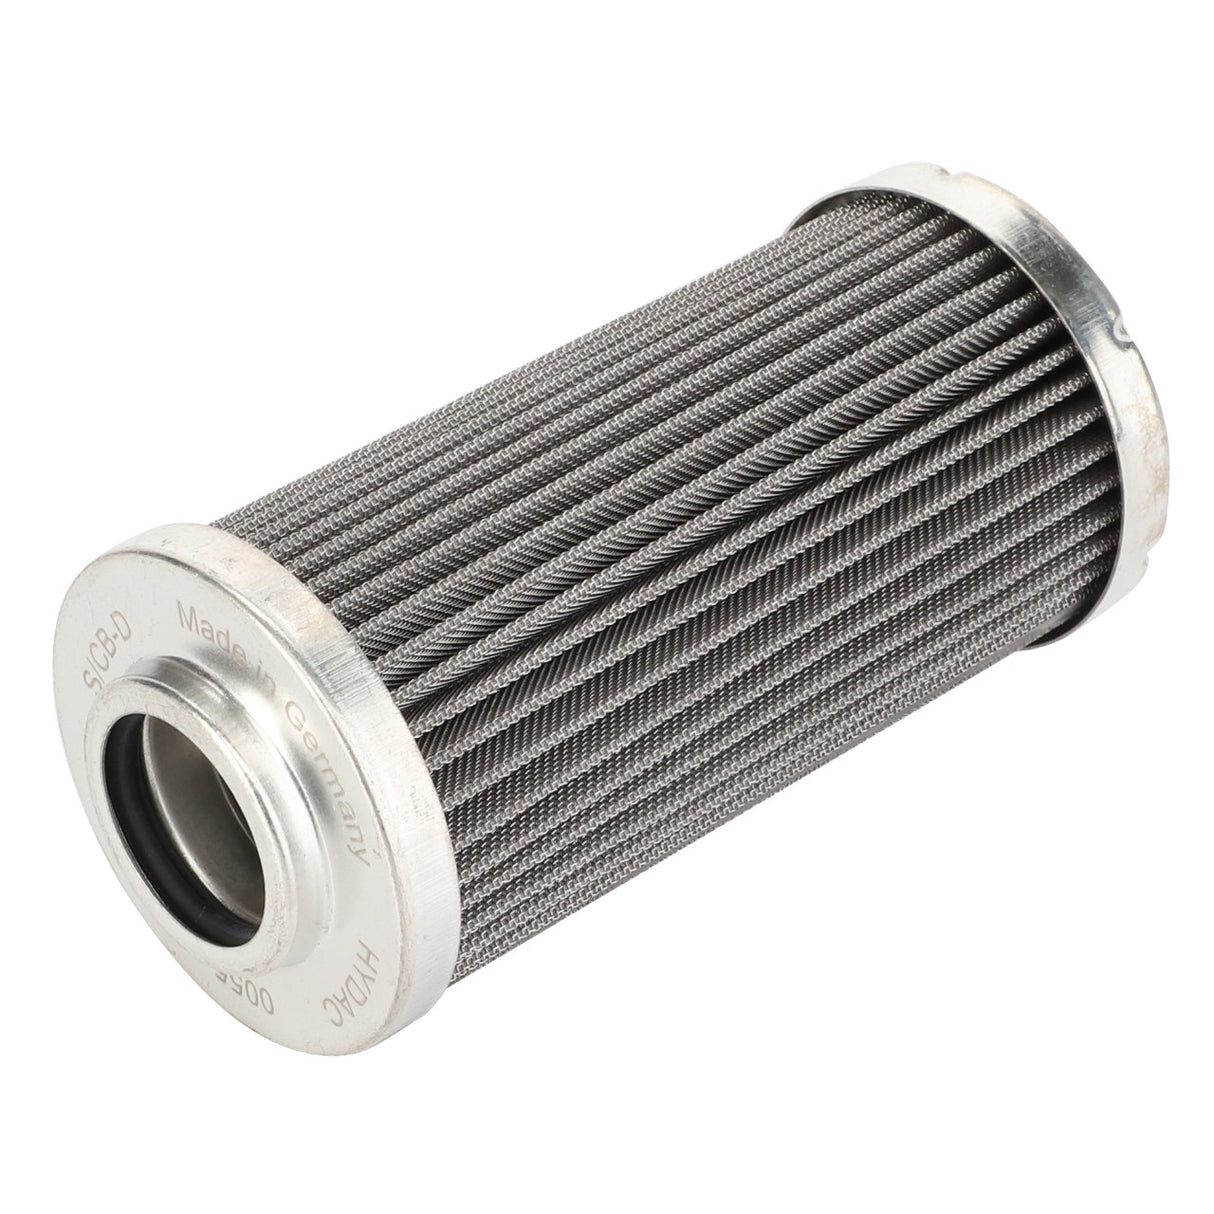 AGCO | Lubrication Oil Filter - Acp0300390 - Farming Parts